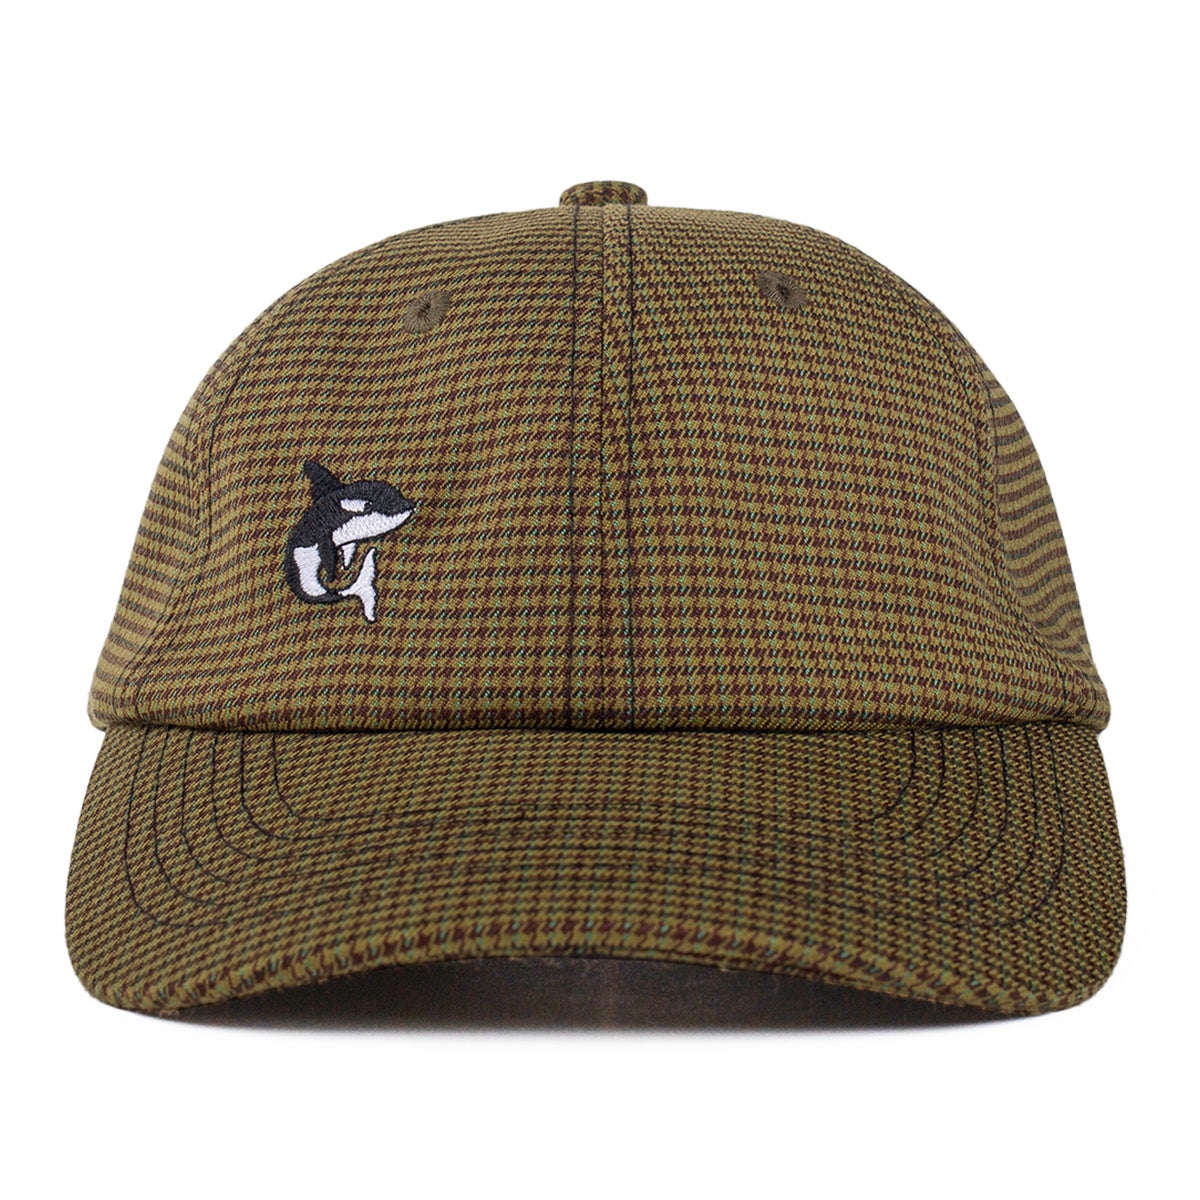 Candice Unwind 6 Panel Hat in Olive/Brown